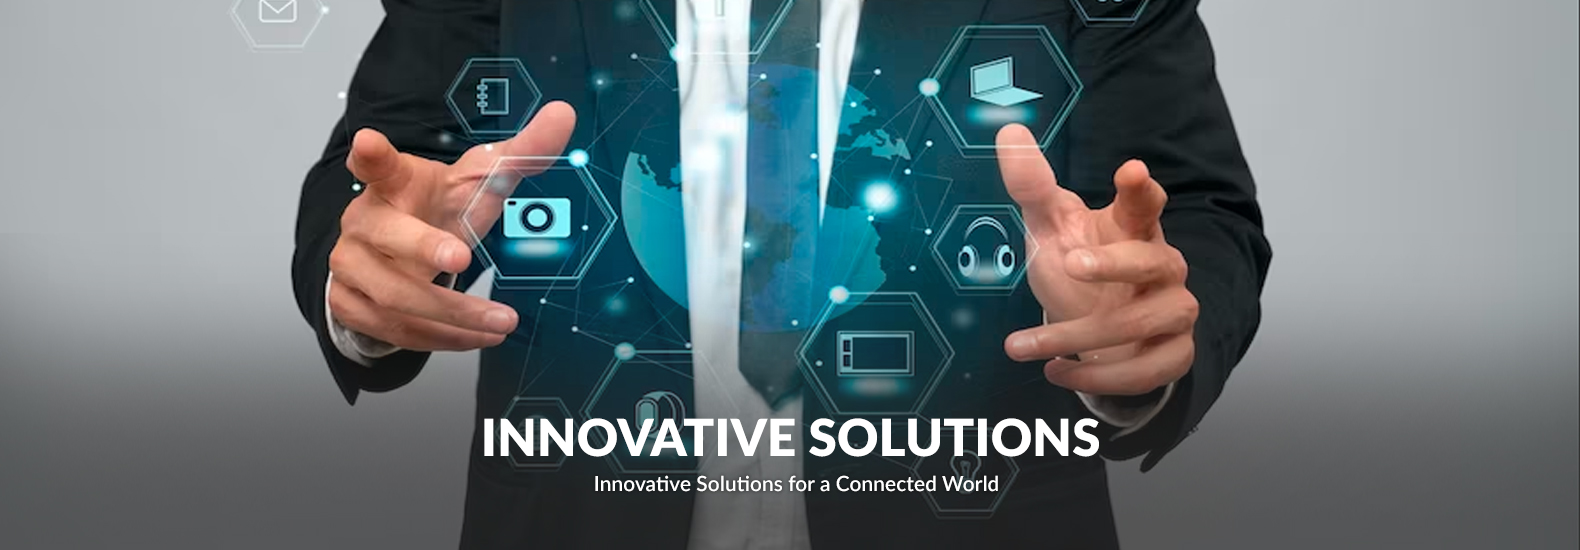 innovative solutions for s connected world